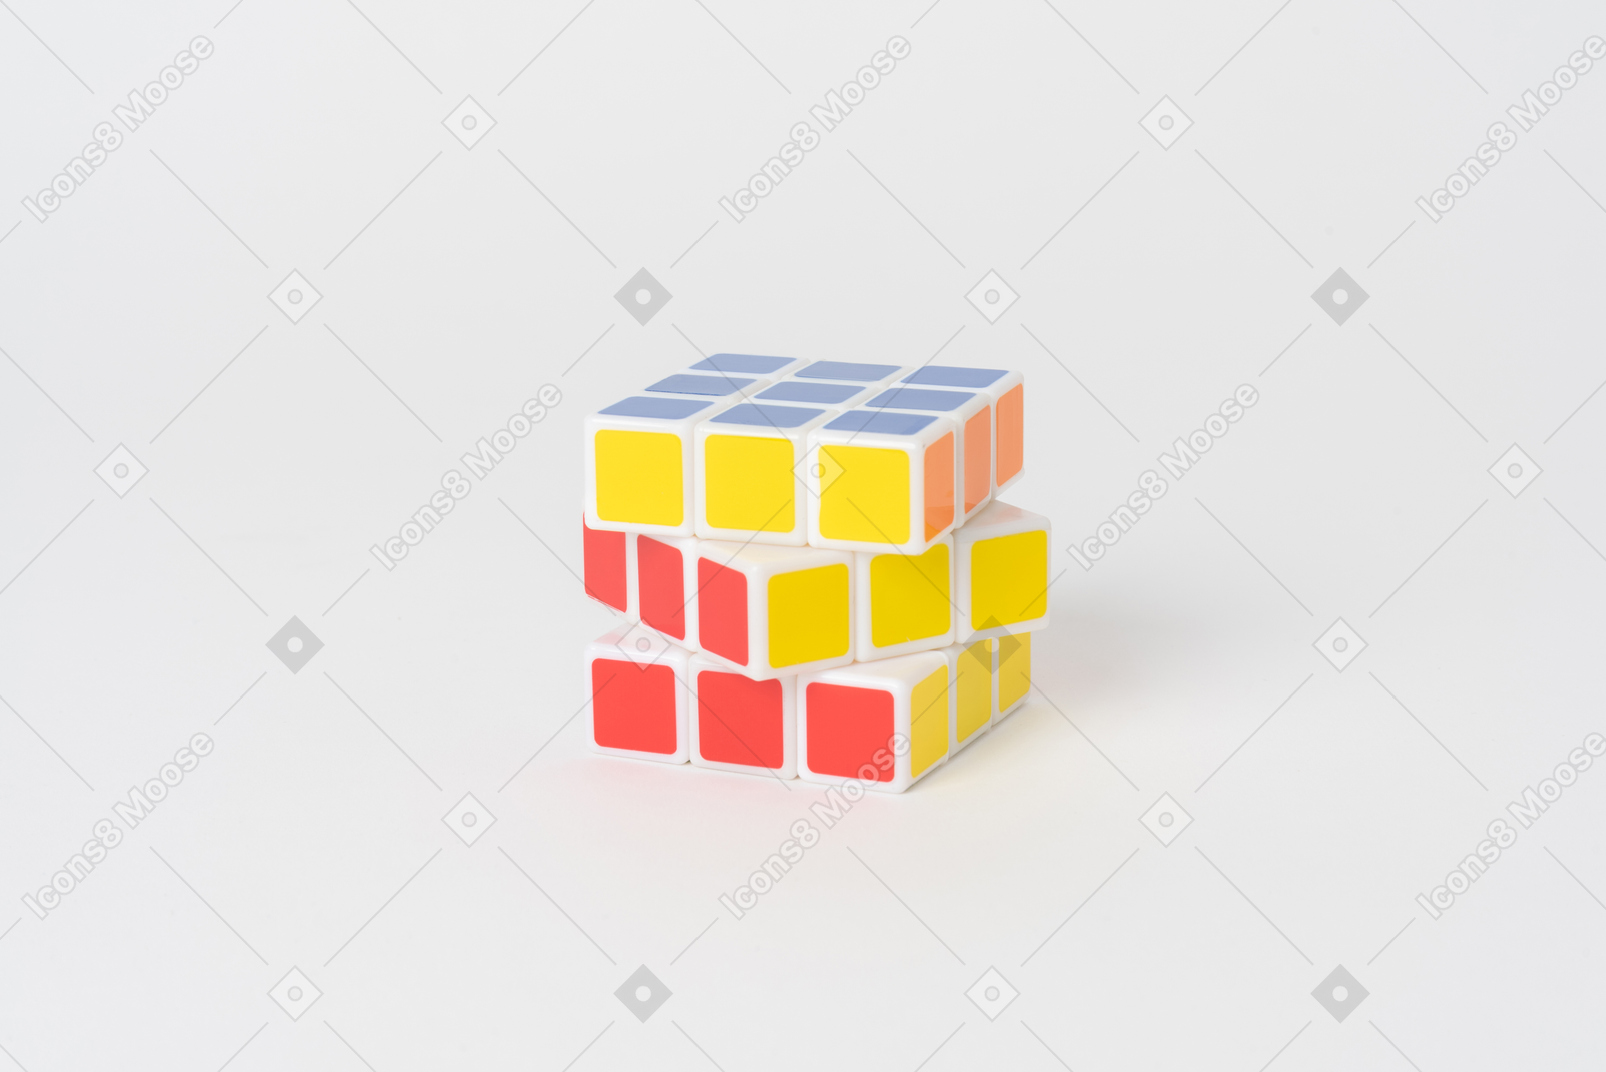 A rubik's cube puzzle lying against a plain white background